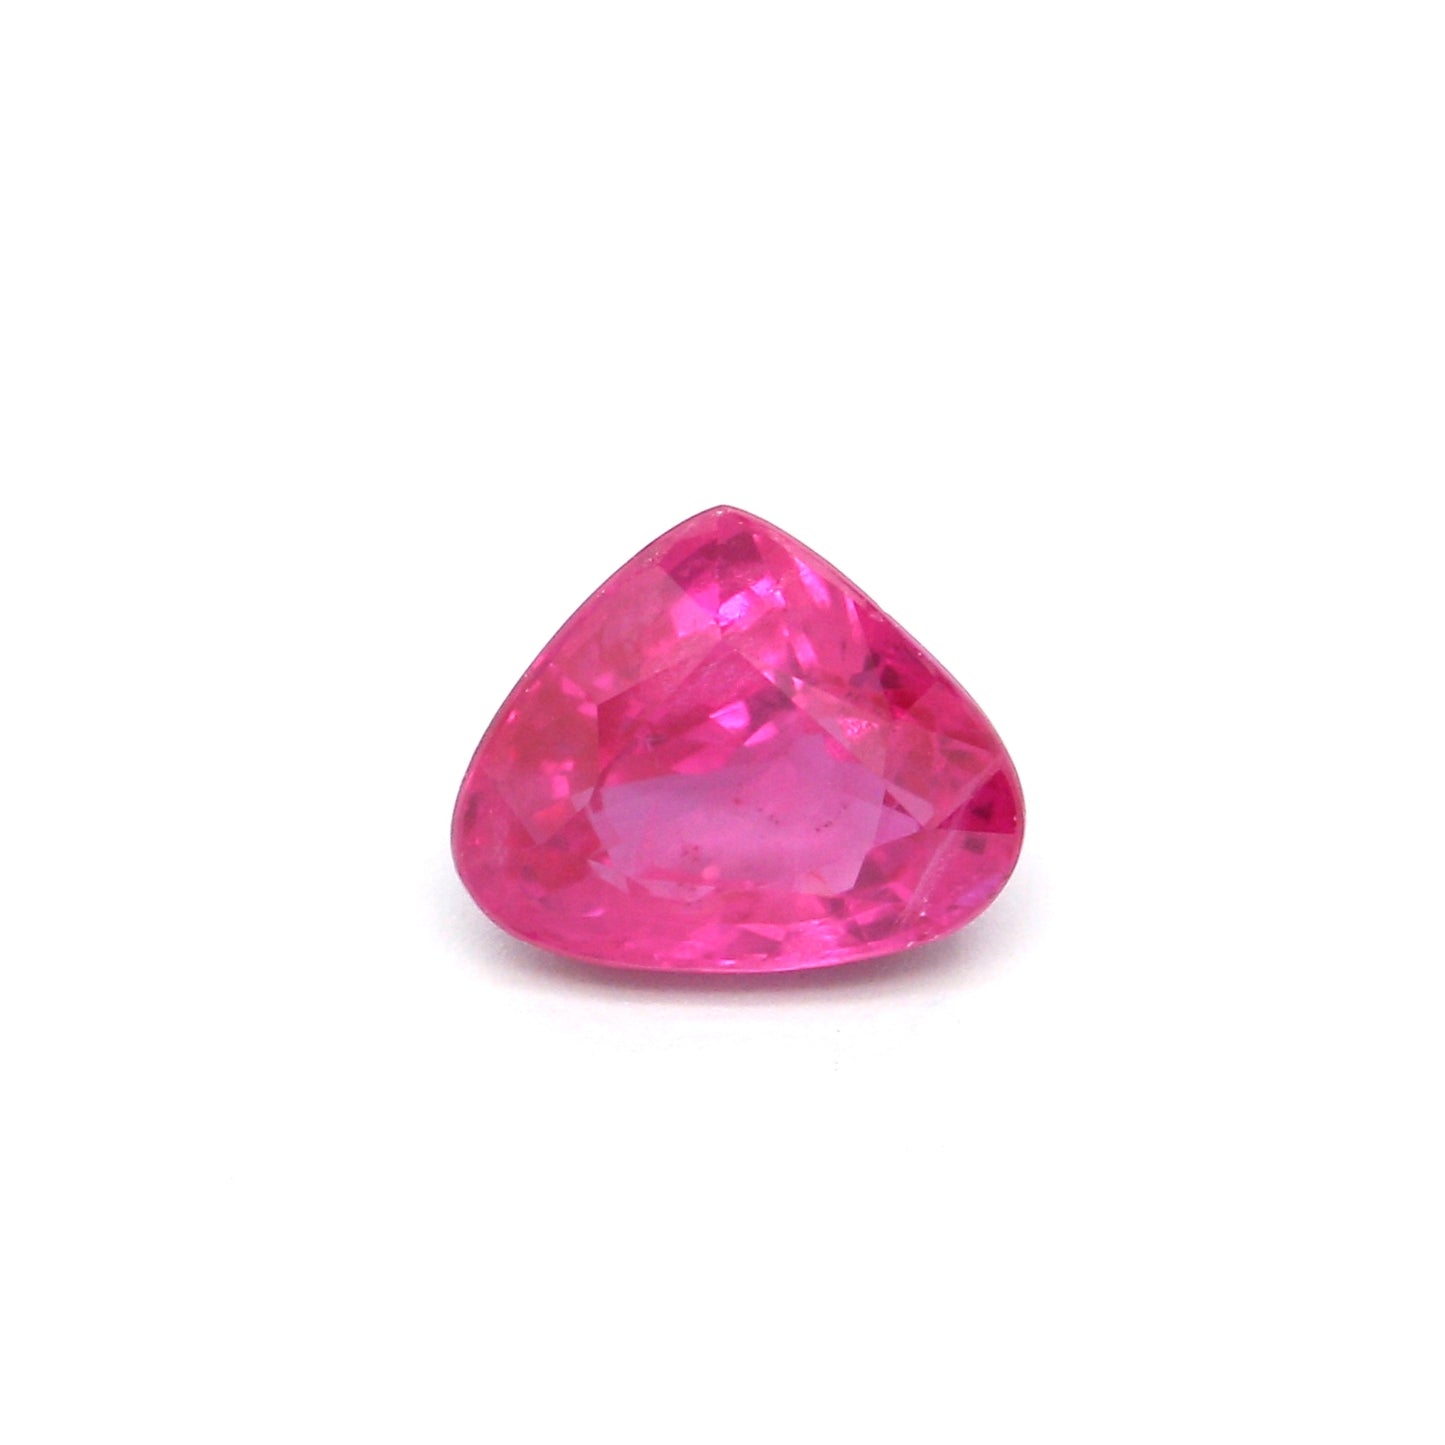 0.98ct Pinkish Red, Pear Shape Ruby, H(a), Myanmar - 5.50 x 6.51 x 3.42mm